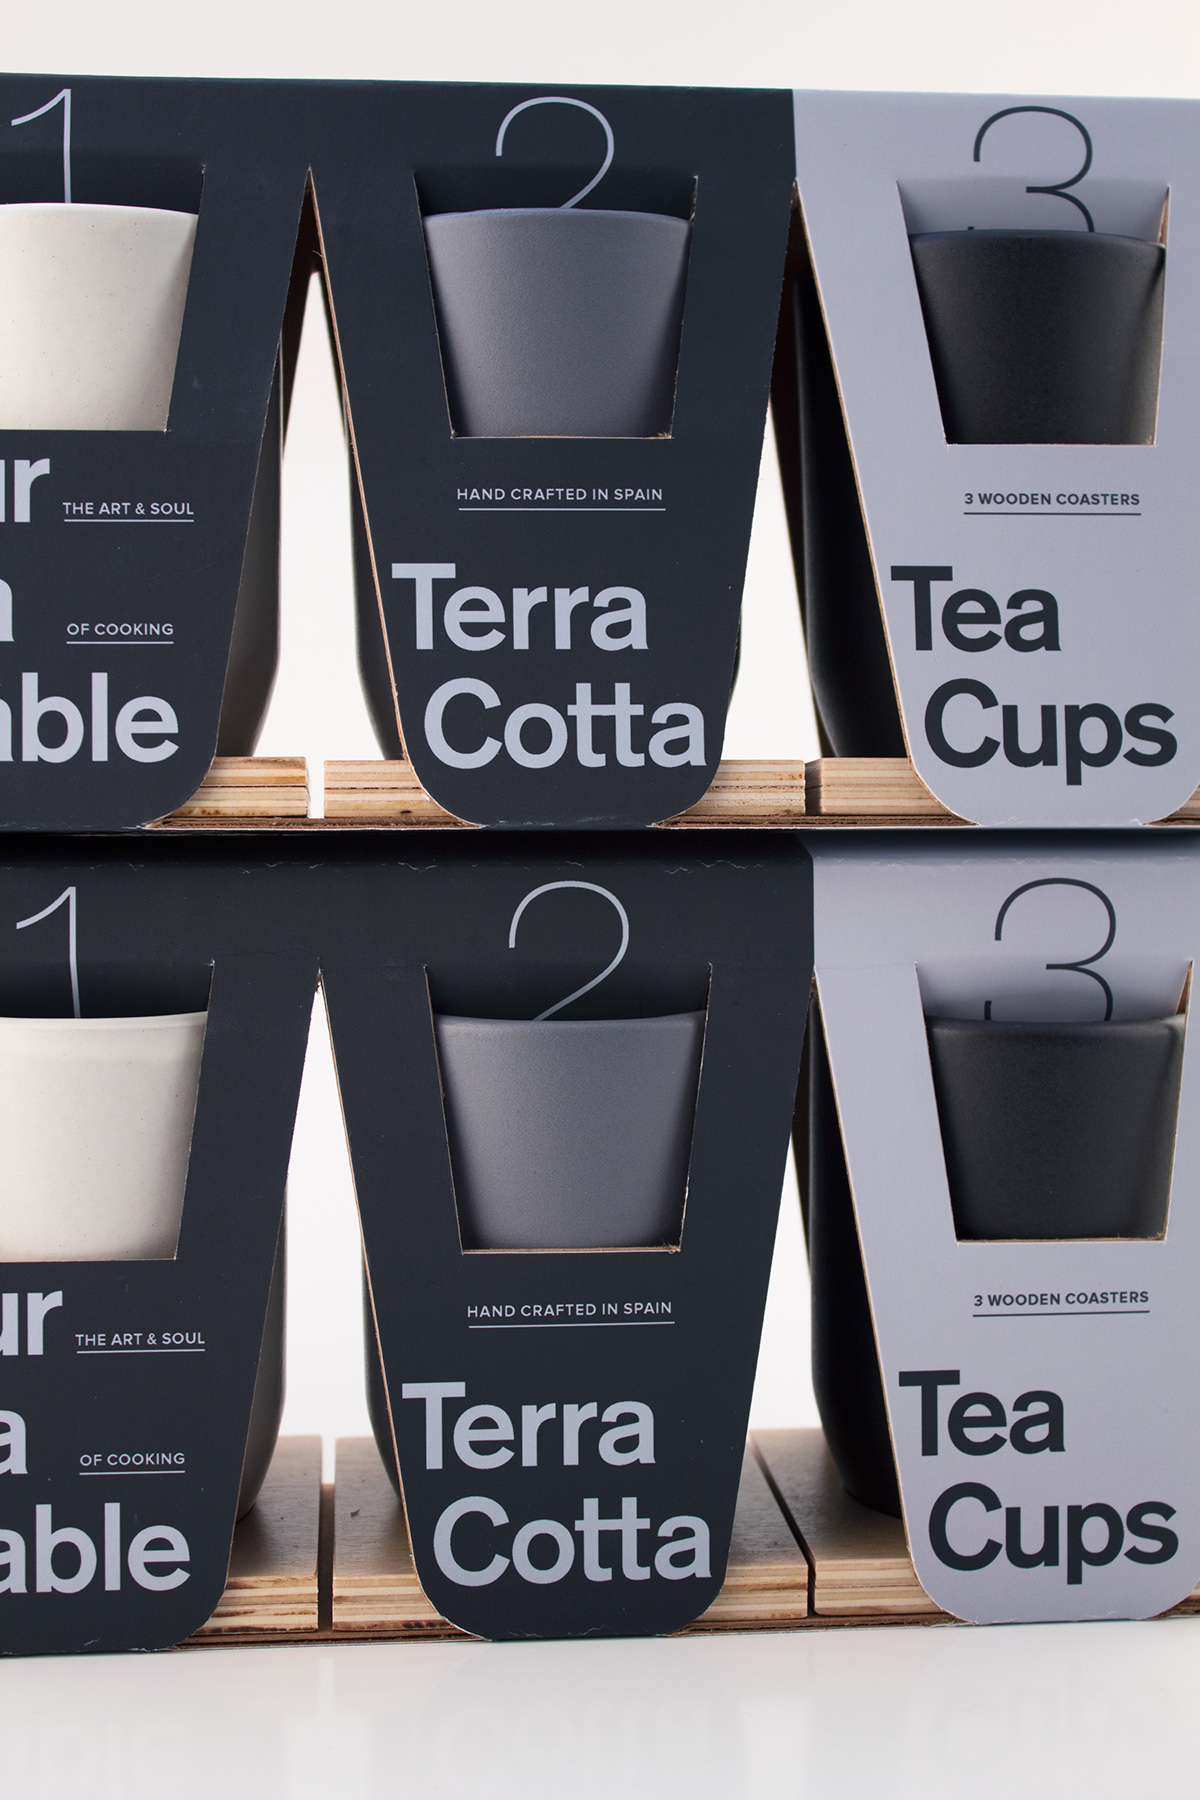 terracotta glass package recyclable cardboard sur la table hand crafted environmental tea cups